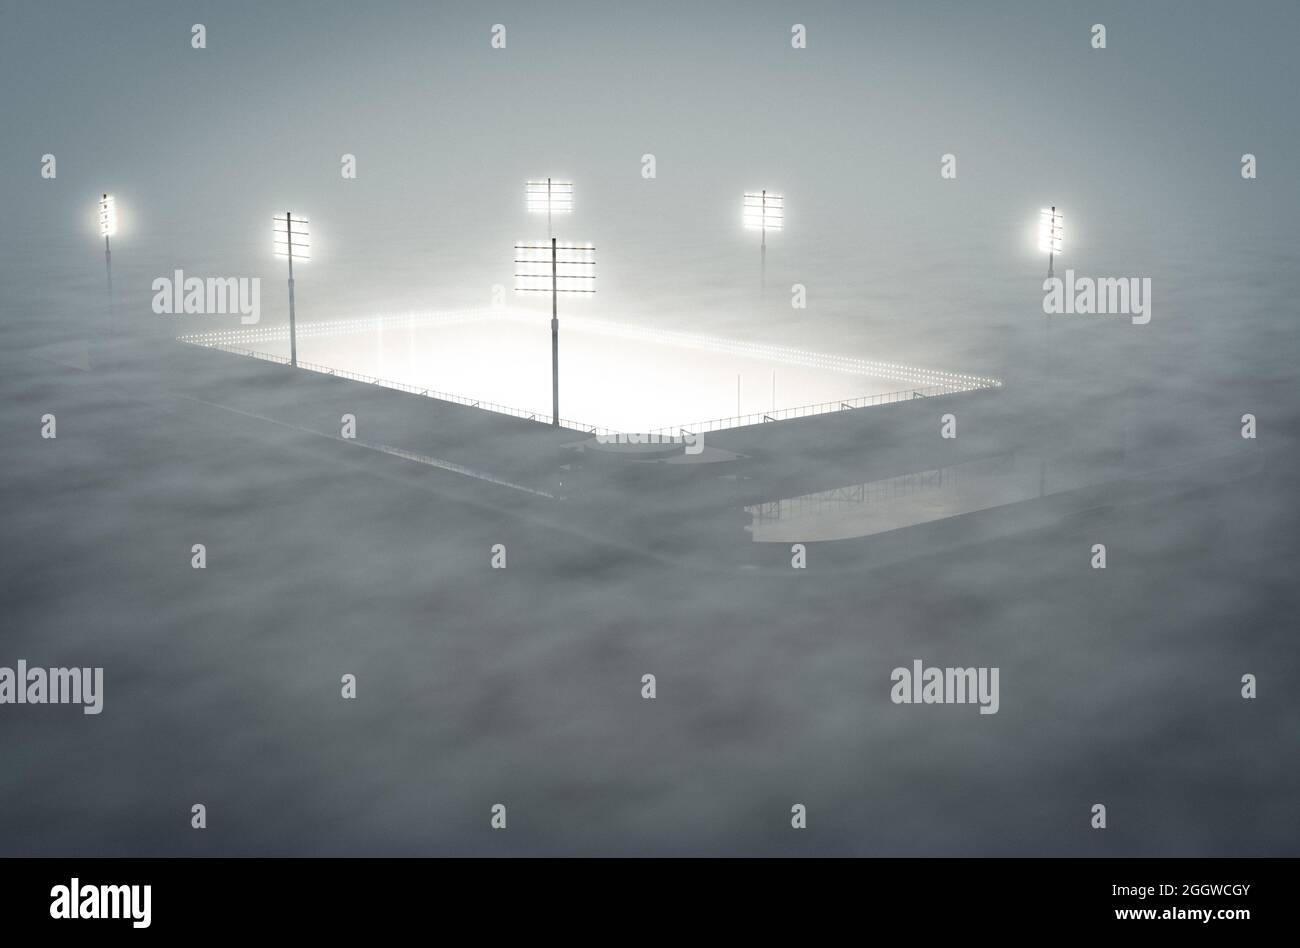 A rugby stadium illuminated by flood lights in the night covered by a thick misty atmosphere - 3D render Stock Photo